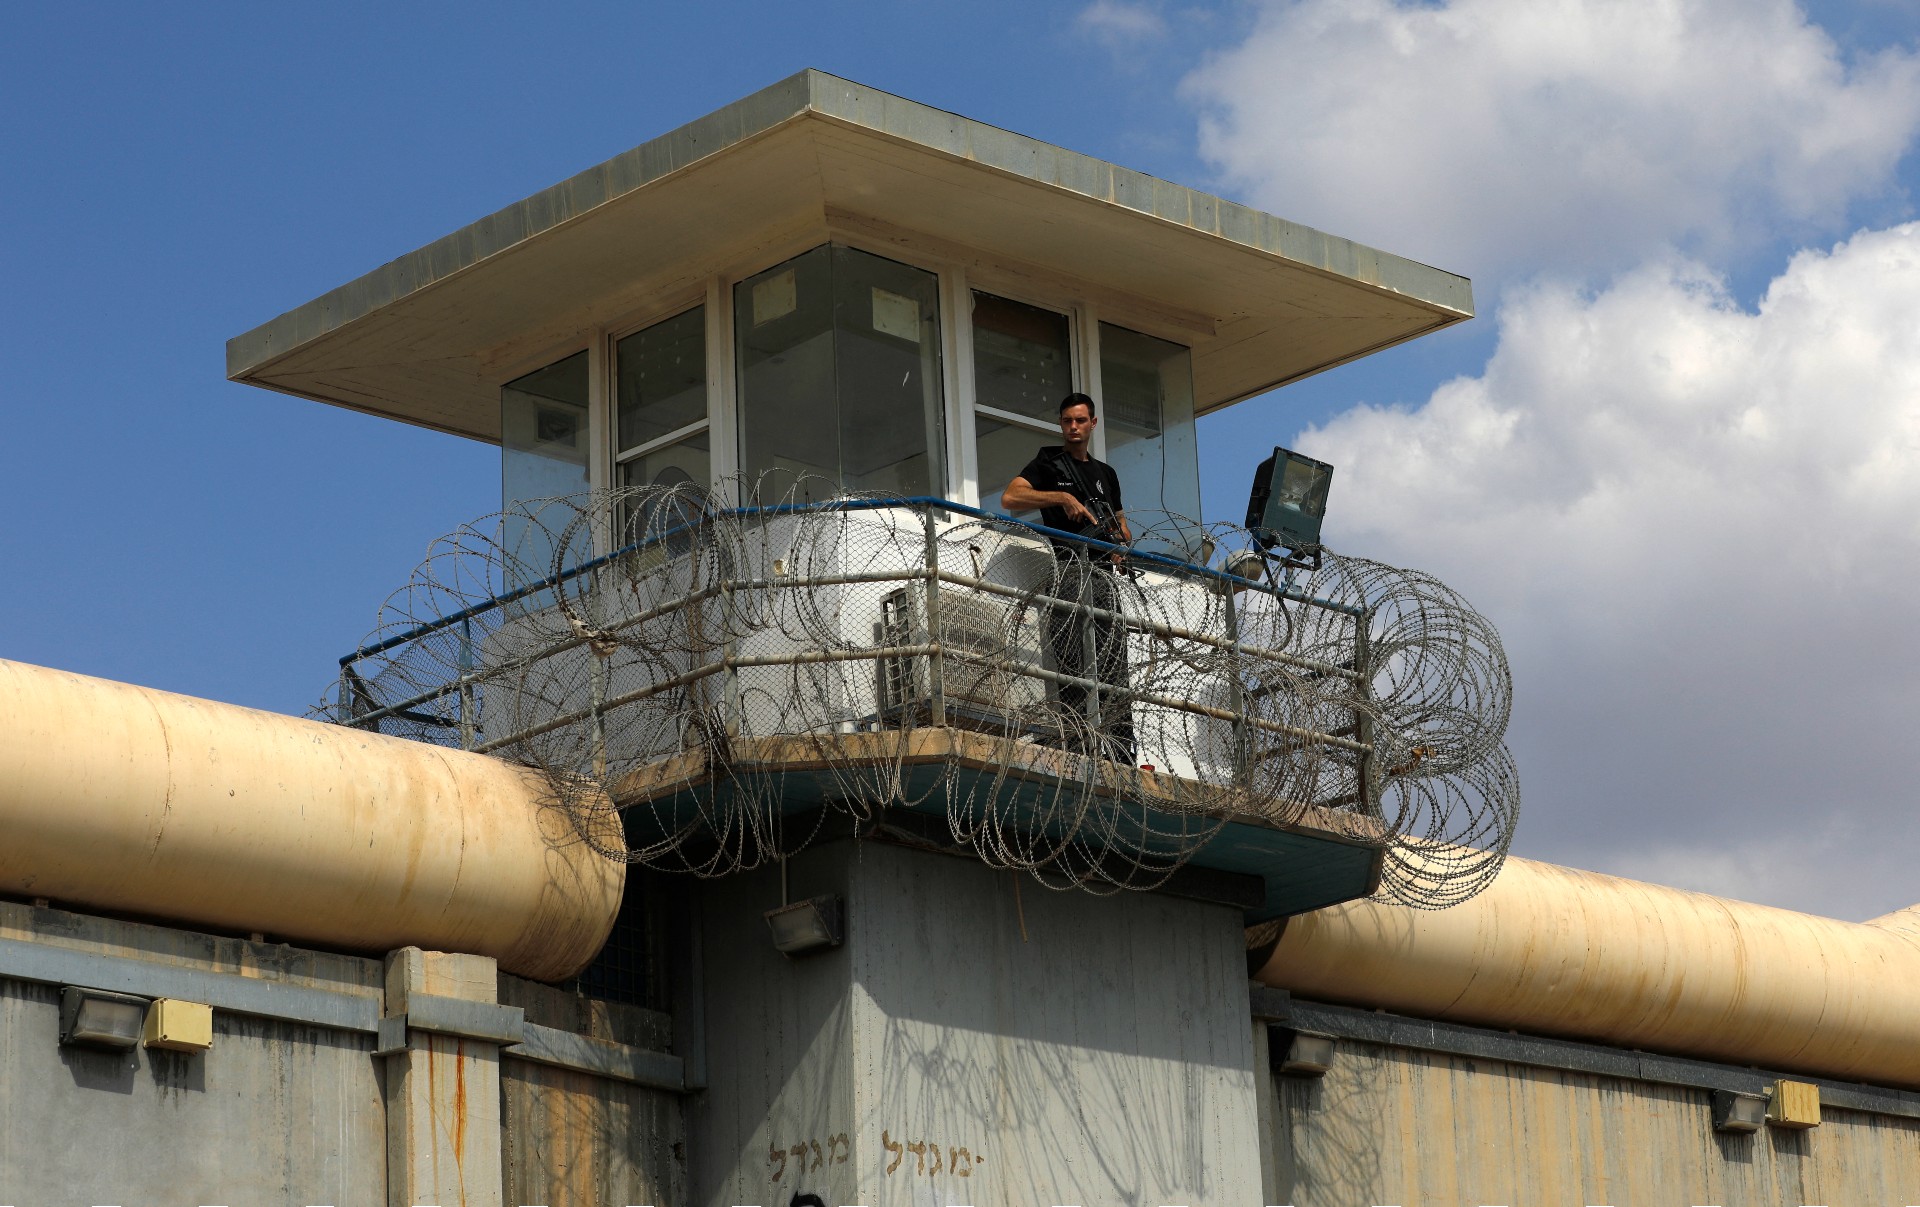 A police officer keeps watch from an observation tower at the Gilboa Prison in northern Israel (AFP)